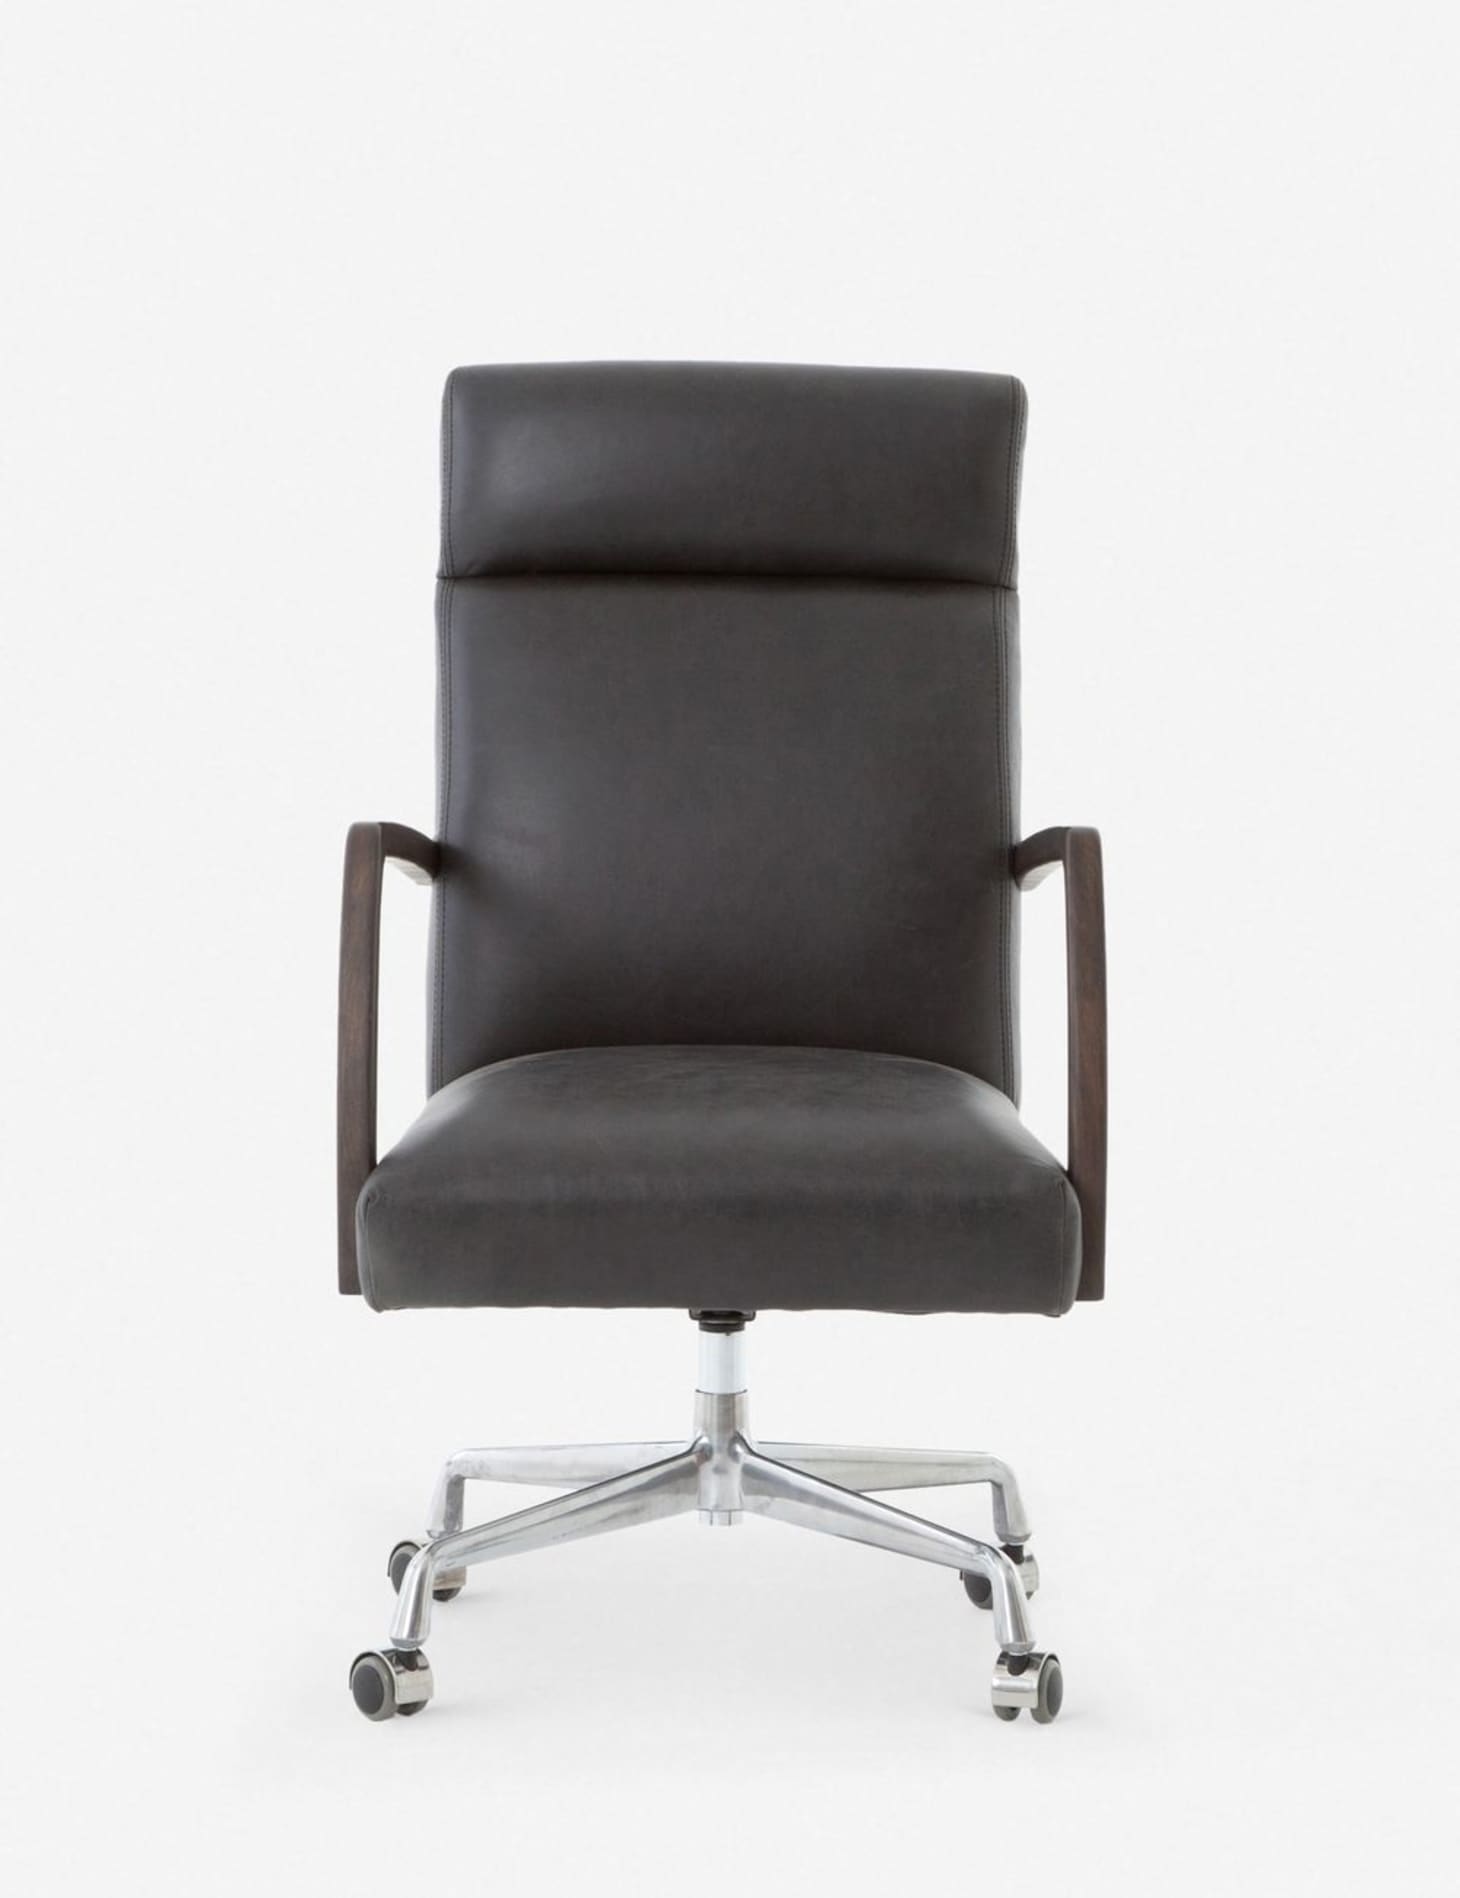 12 Comfortable Stylish Office Chairs For Work From Home Desks